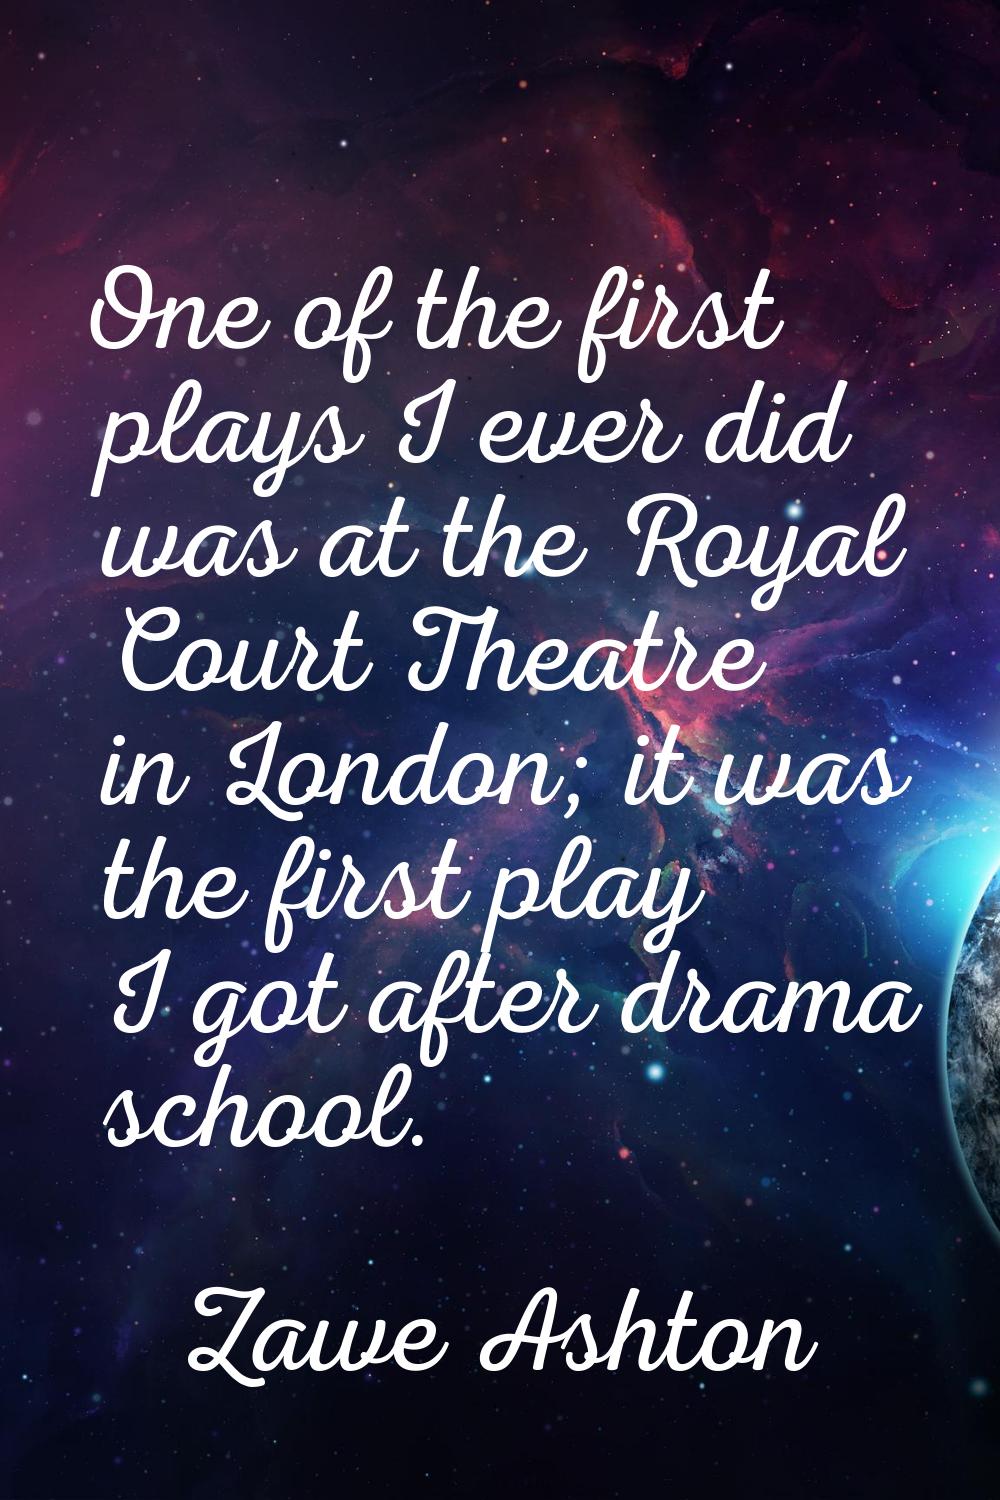 One of the first plays I ever did was at the Royal Court Theatre in London; it was the first play I